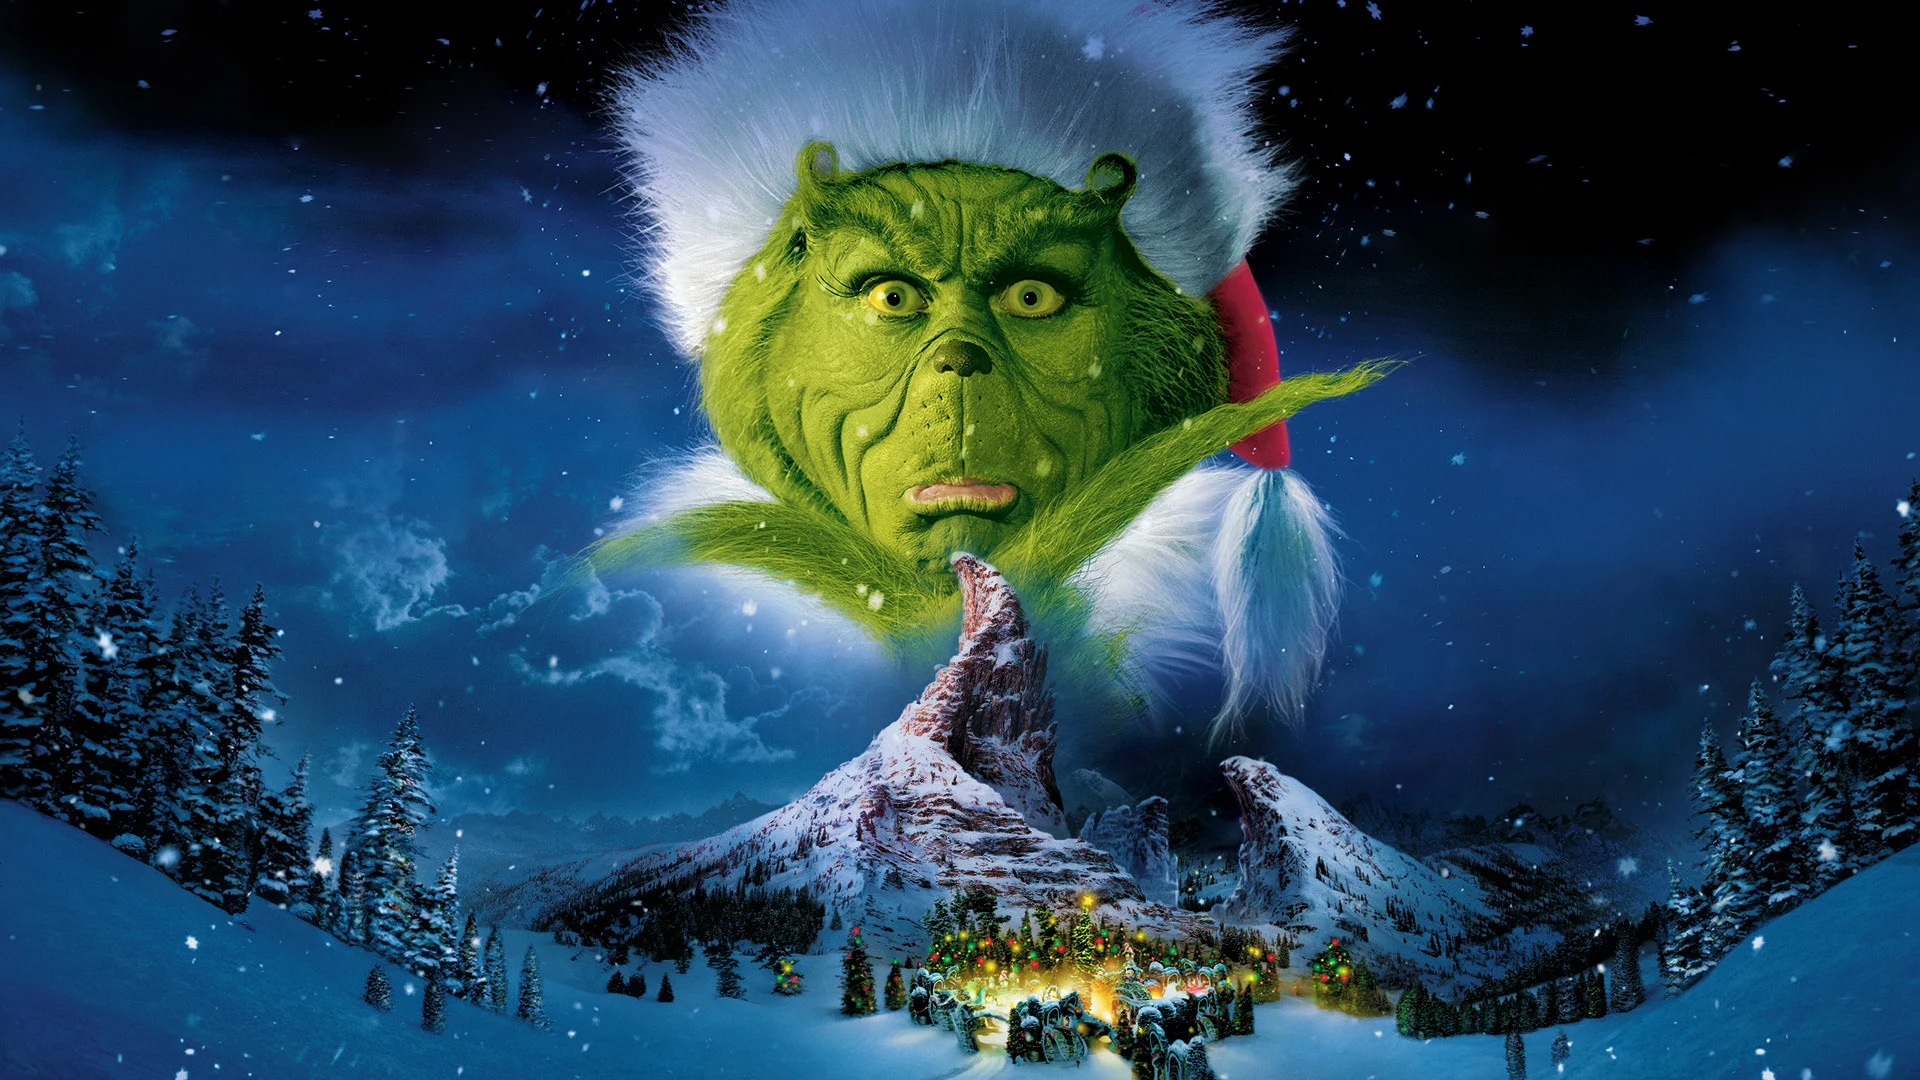 The Grinch movie poster 